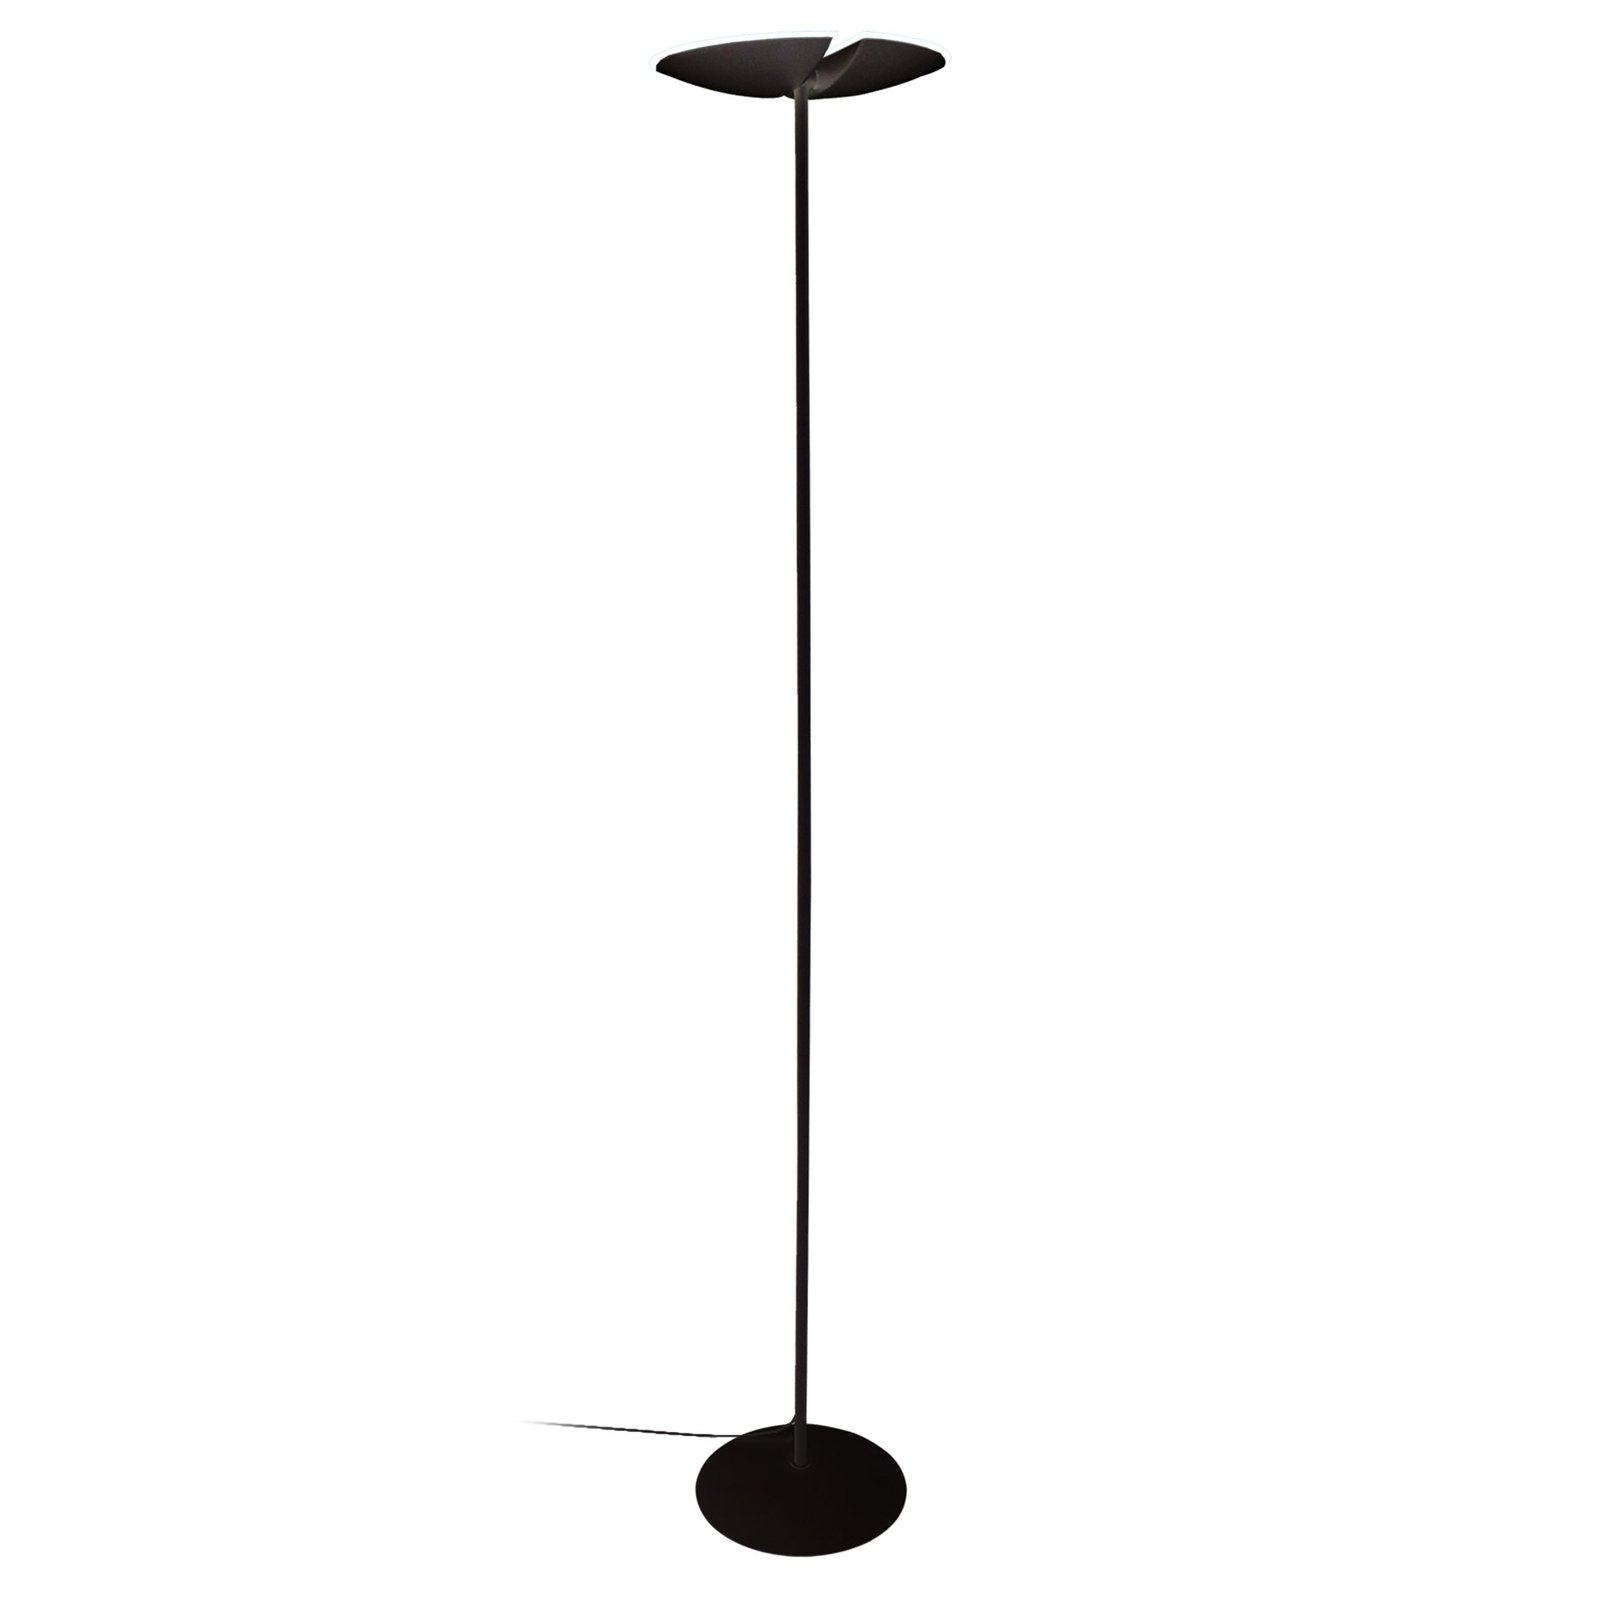 Kitel 79 LED uplighter with a divided lampshade